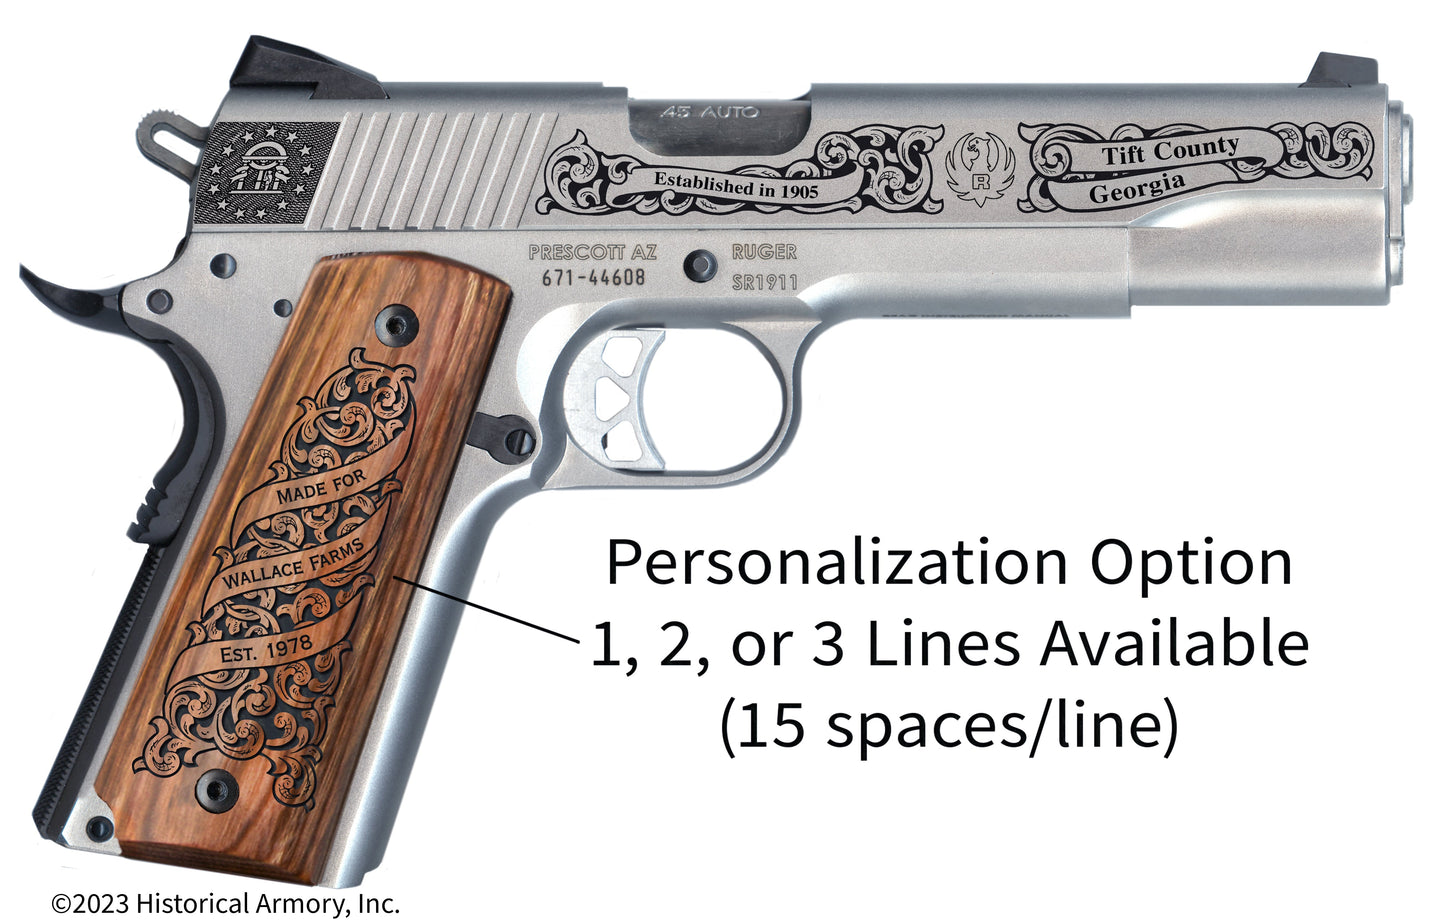 Tift County Georgia Personalized Engraved .45 Auto Ruger 1911